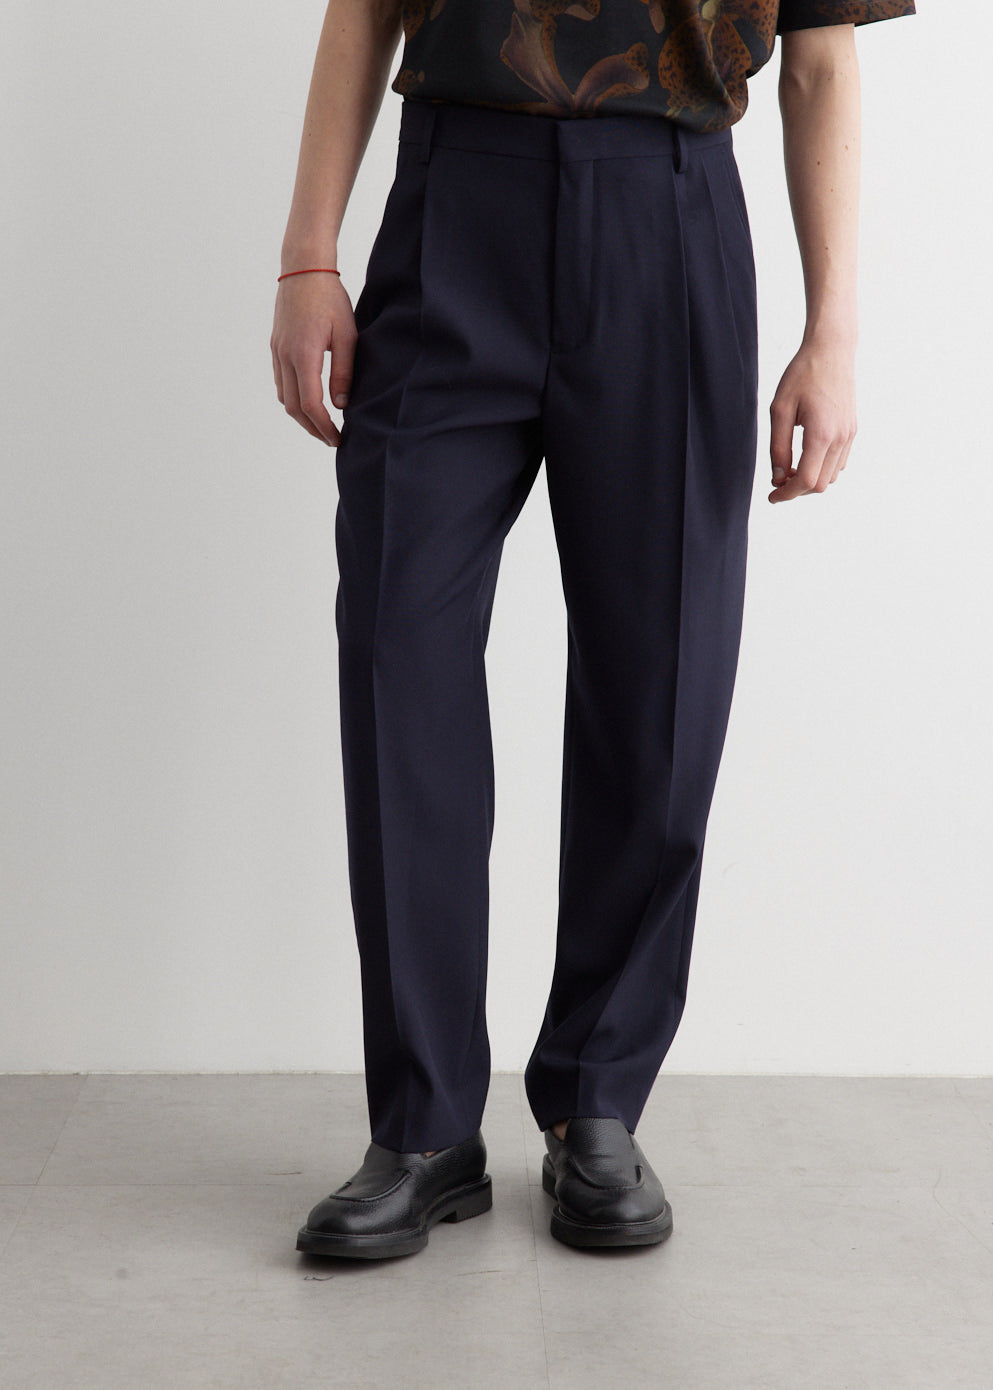 Pellow Trousers